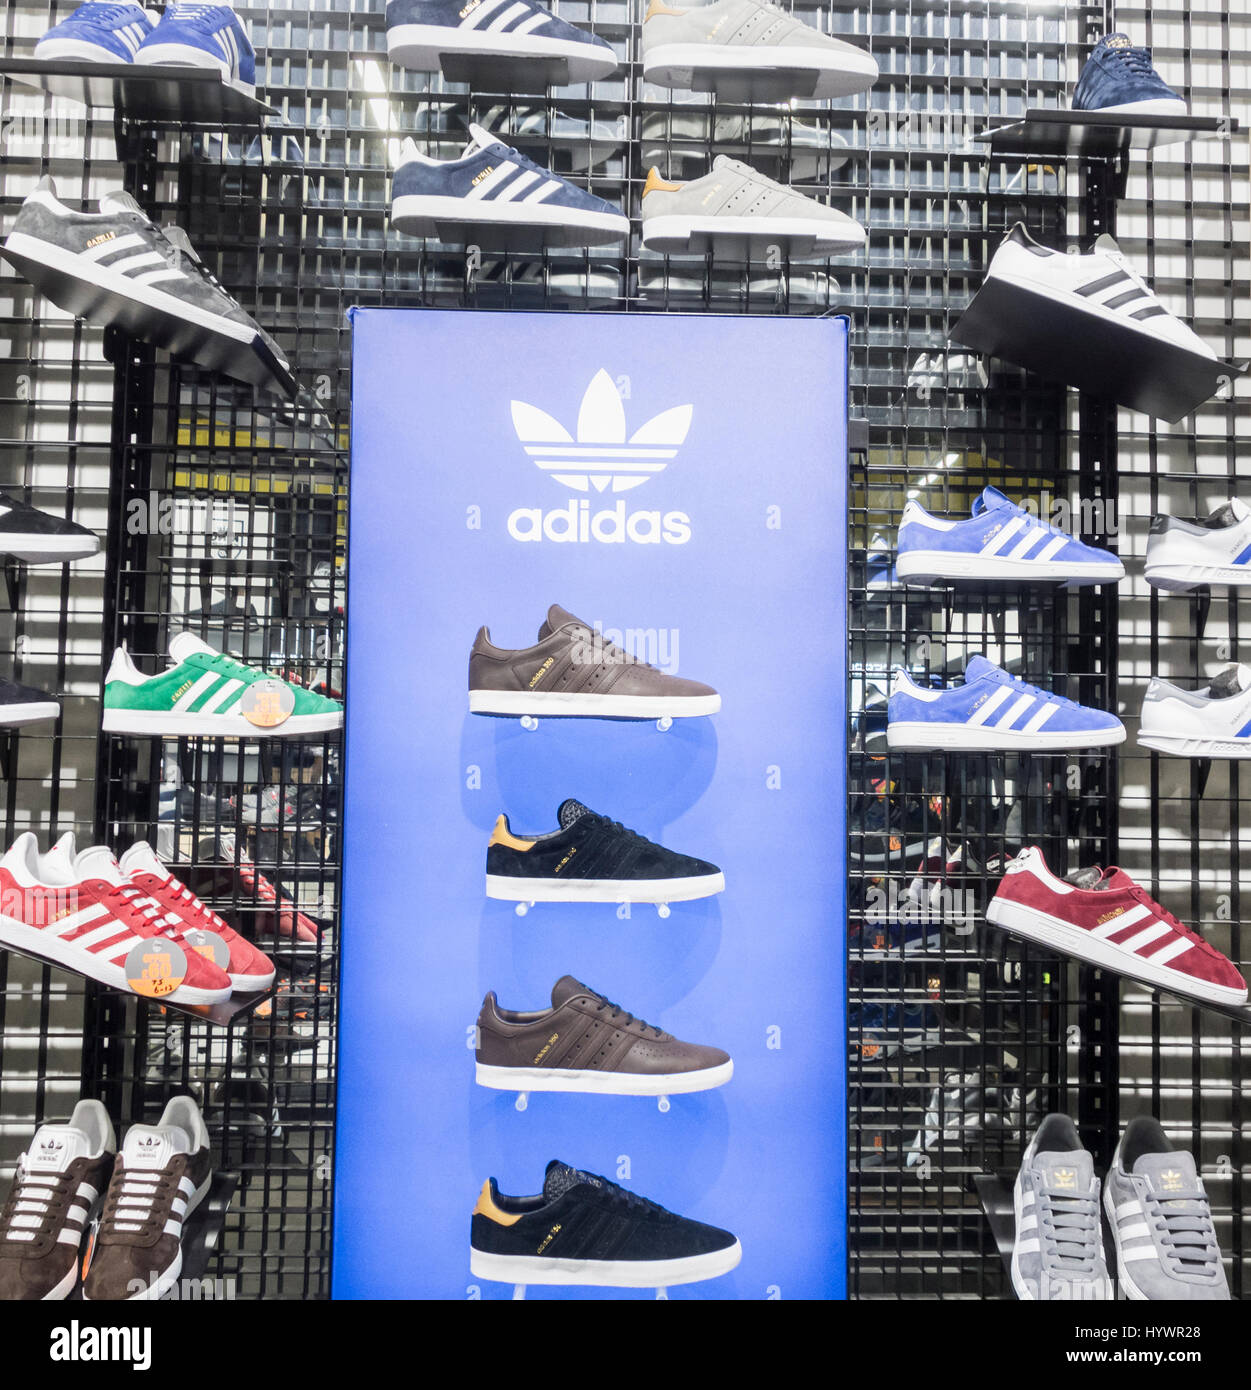 adidas shoes jd sports